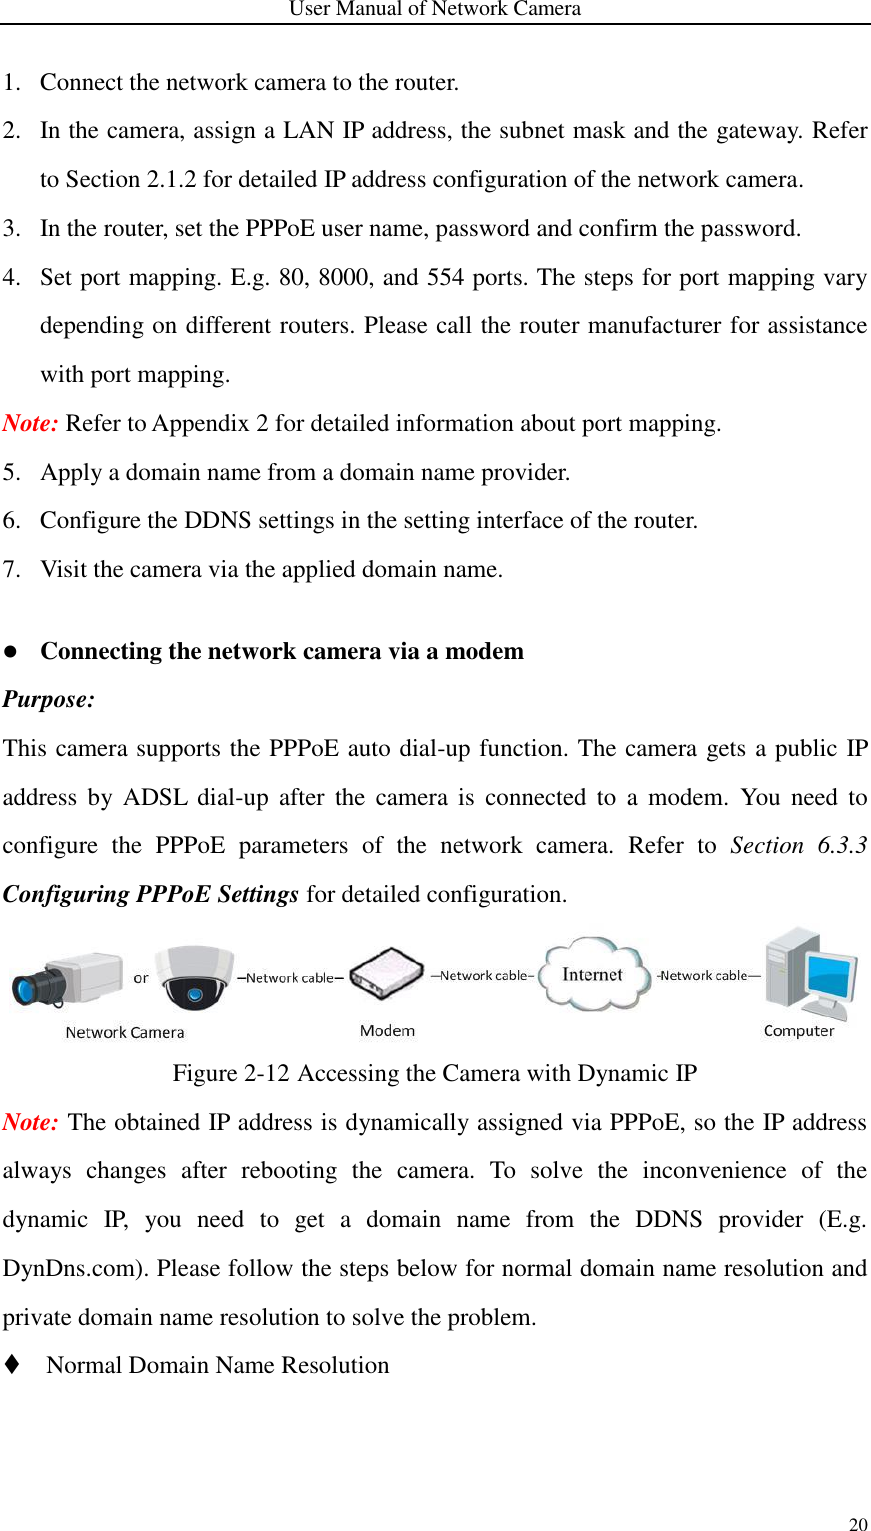 User Manual of Network Camera 20  1. Connect the network camera to the router.   2. In the camera, assign a LAN IP address, the subnet mask and the gateway. Refer to Section 2.1.2 for detailed IP address configuration of the network camera. 3. In the router, set the PPPoE user name, password and confirm the password. 4. Set port mapping. E.g. 80, 8000, and 554 ports. The steps for port mapping vary depending on different routers. Please call the router manufacturer for assistance with port mapping. Note: Refer to Appendix 2 for detailed information about port mapping. 5. Apply a domain name from a domain name provider. 6. Configure the DDNS settings in the setting interface of the router. 7. Visit the camera via the applied domain name.   Connecting the network camera via a modem Purpose: This camera supports the PPPoE auto dial-up function. The camera gets a public IP address by  ADSL  dial-up  after  the  camera  is  connected  to  a  modem.  You  need to configure  the  PPPoE  parameters  of  the  network  camera.  Refer  to  Section  6.3.3 Configuring PPPoE Settings for detailed configuration.  Figure 2-12 Accessing the Camera with Dynamic IP Note: The obtained IP address is dynamically assigned via PPPoE, so the IP address always  changes  after  rebooting  the  camera.  To  solve  the  inconvenience  of  the dynamic  IP,  you  need  to  get  a  domain  name  from  the  DDNS  provider  (E.g. DynDns.com). Please follow the steps below for normal domain name resolution and private domain name resolution to solve the problem.  Normal Domain Name Resolution 